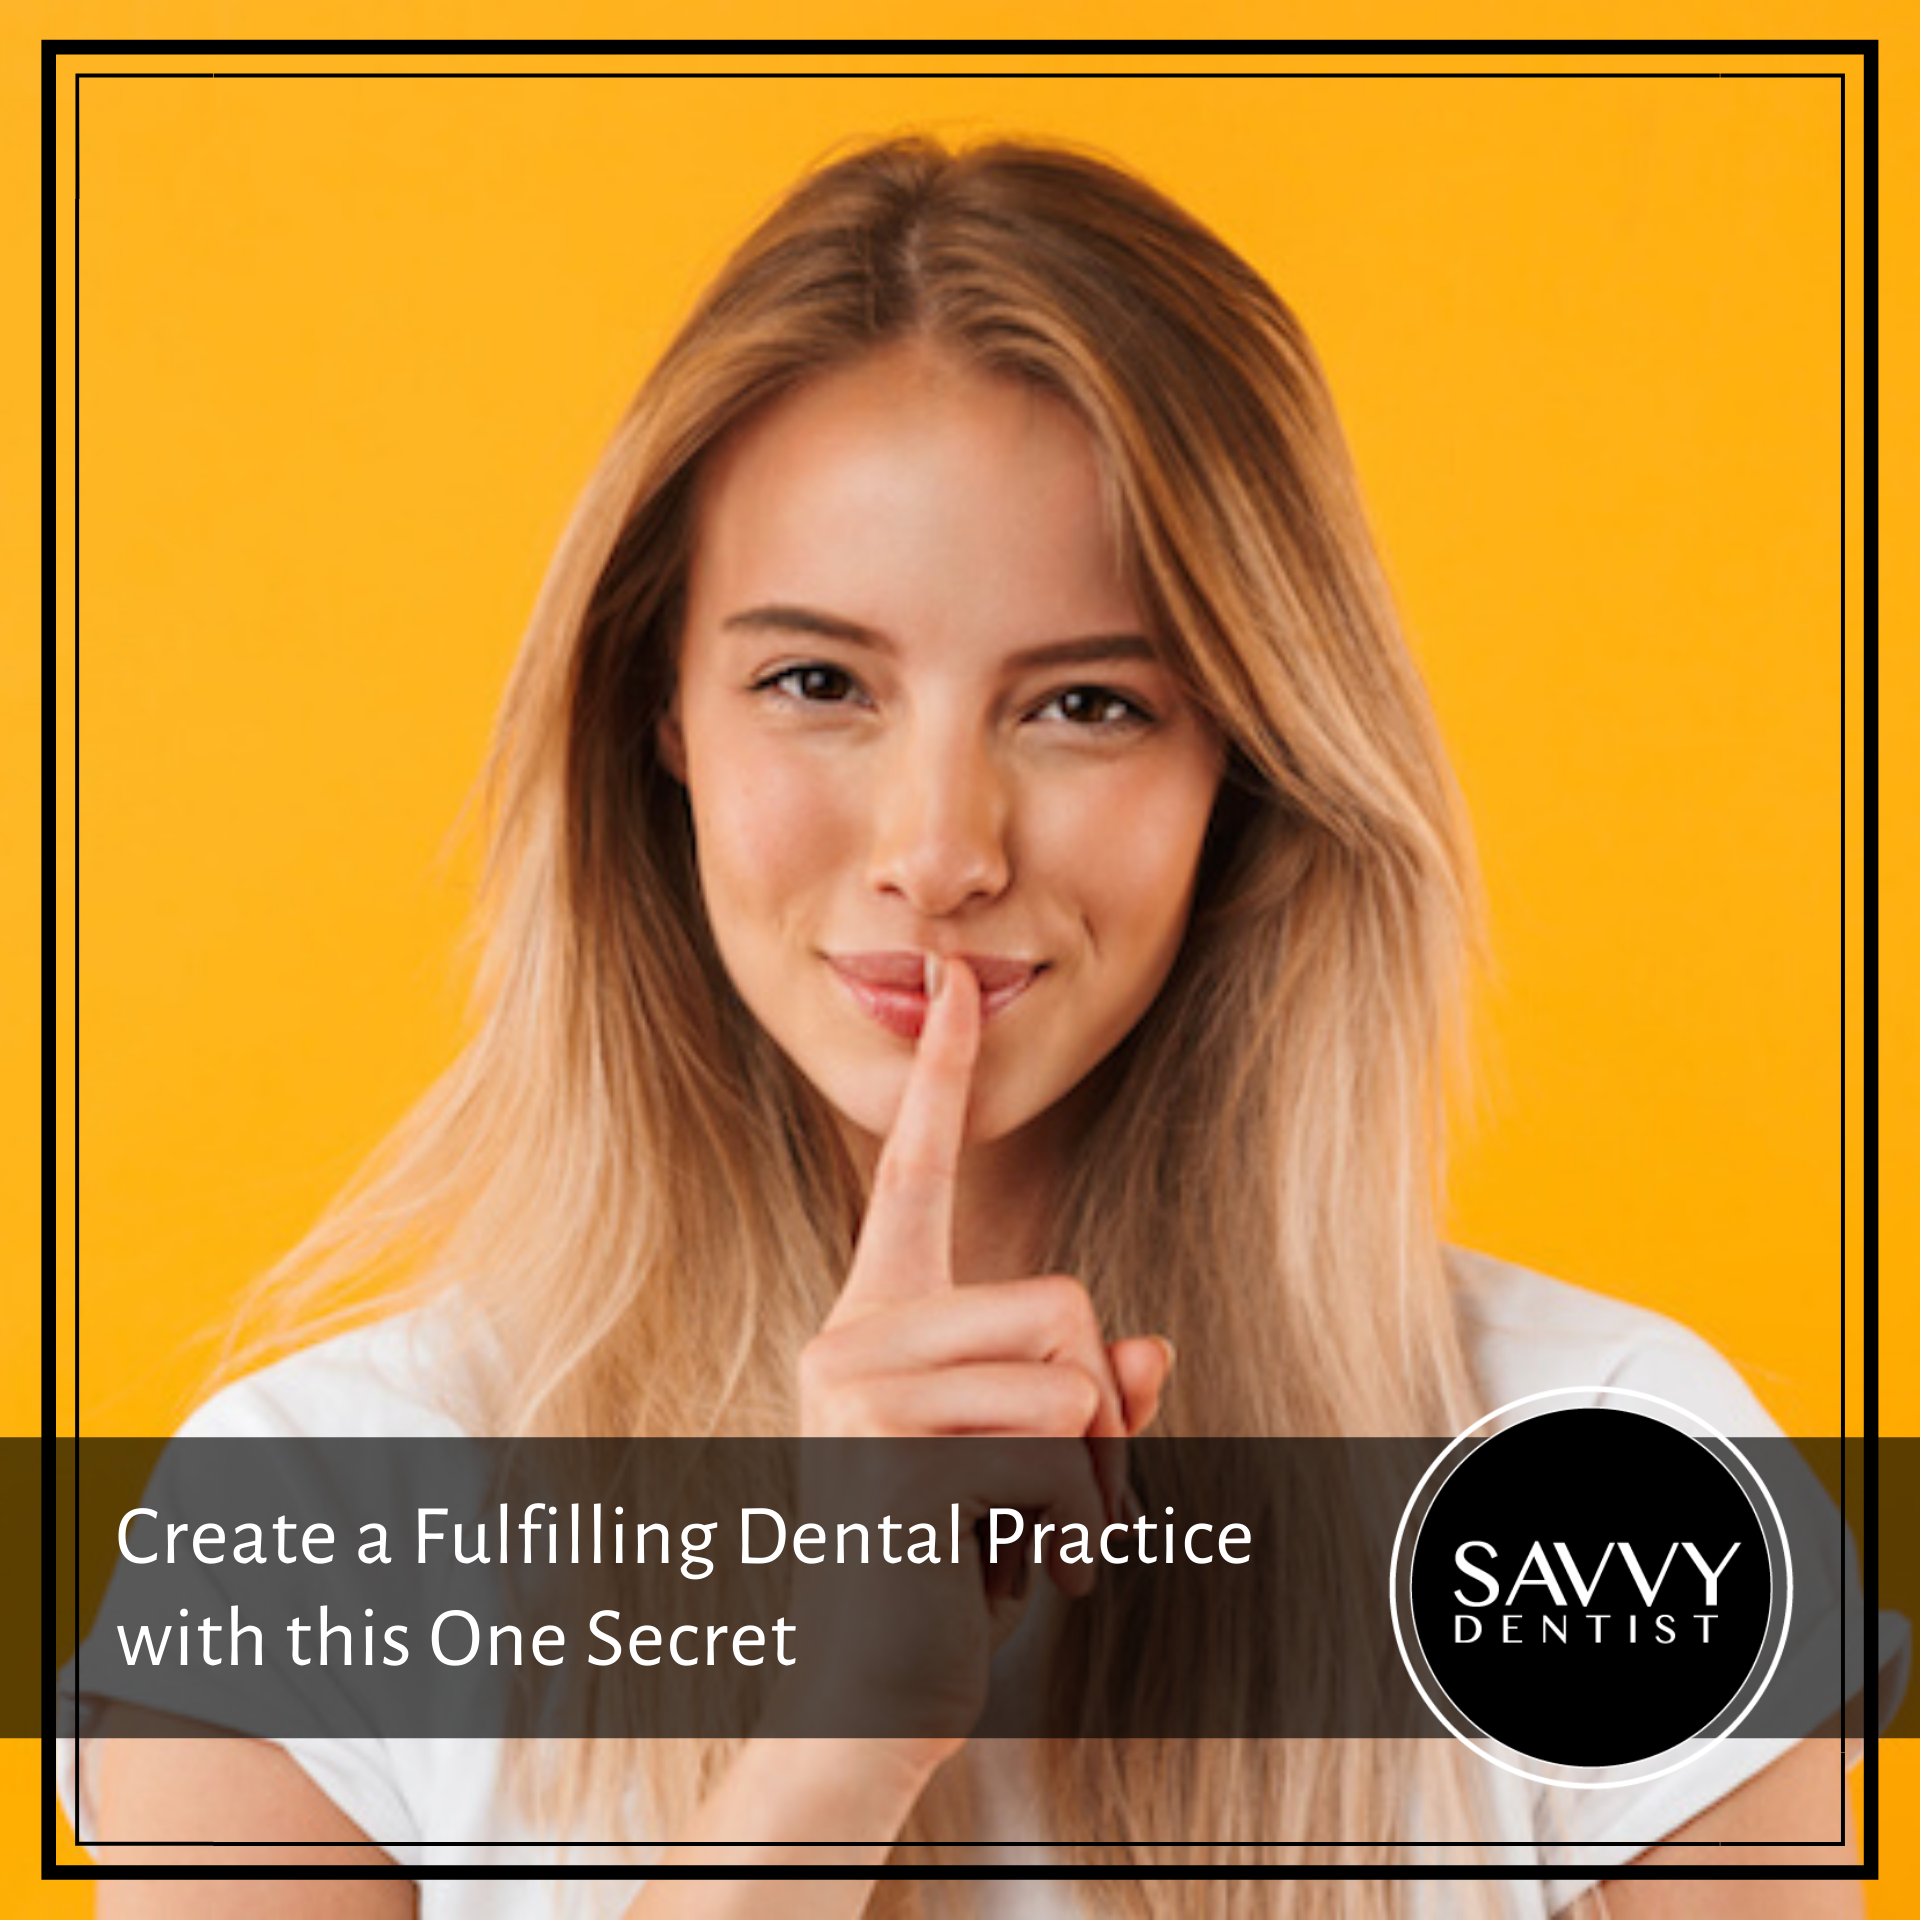 Create a Fulfilling Dental Practice with This One Secret